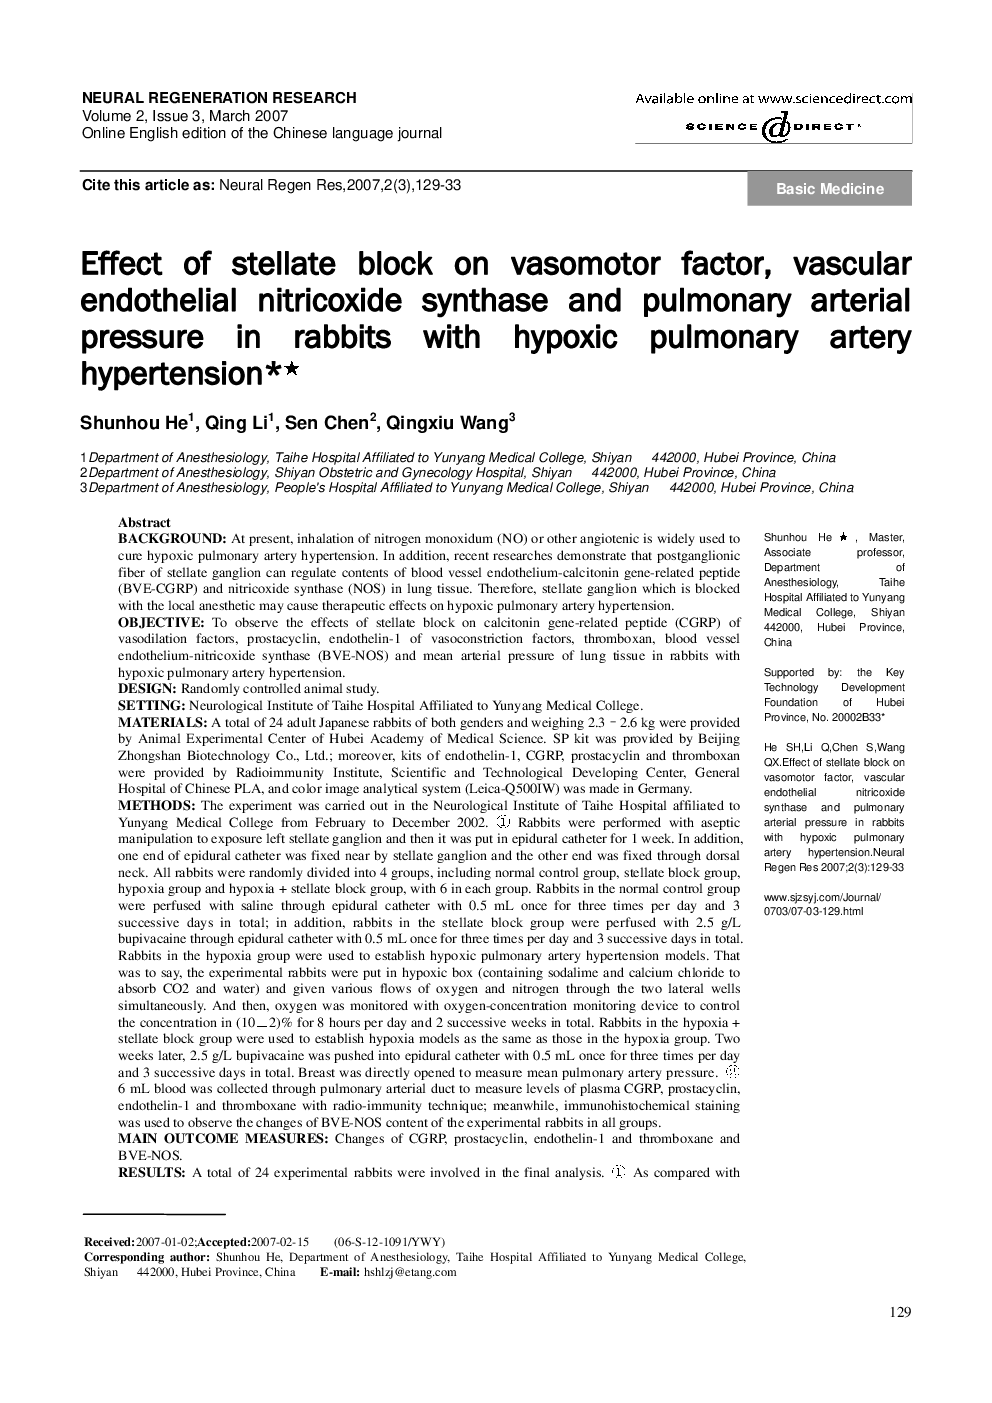 Effect of stellate block on vasomotor factor, vascular endothelial nitricoxide synthase and pulmonary arterial pressure in rabbits with hypoxic pulmonary artery hypertension*